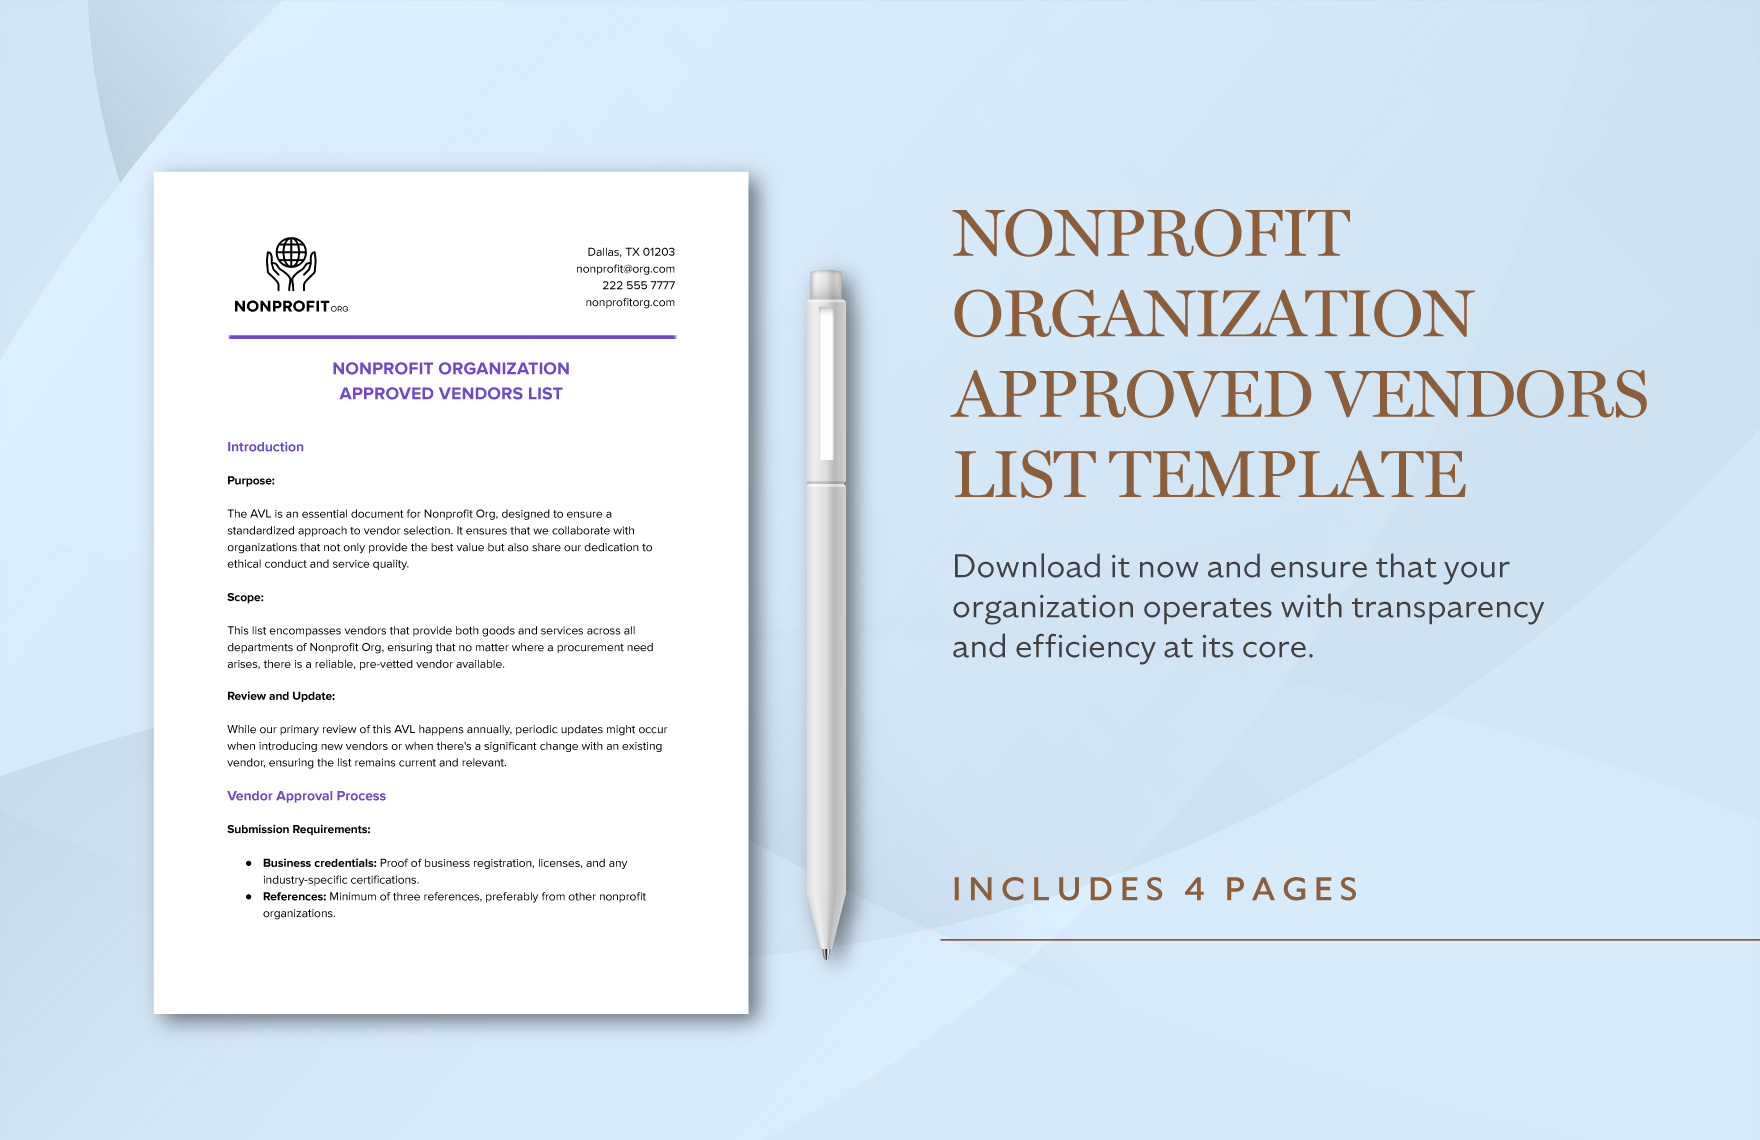 Nonprofit Organization Approved Vendors List Template in Word, Google Docs, PDF